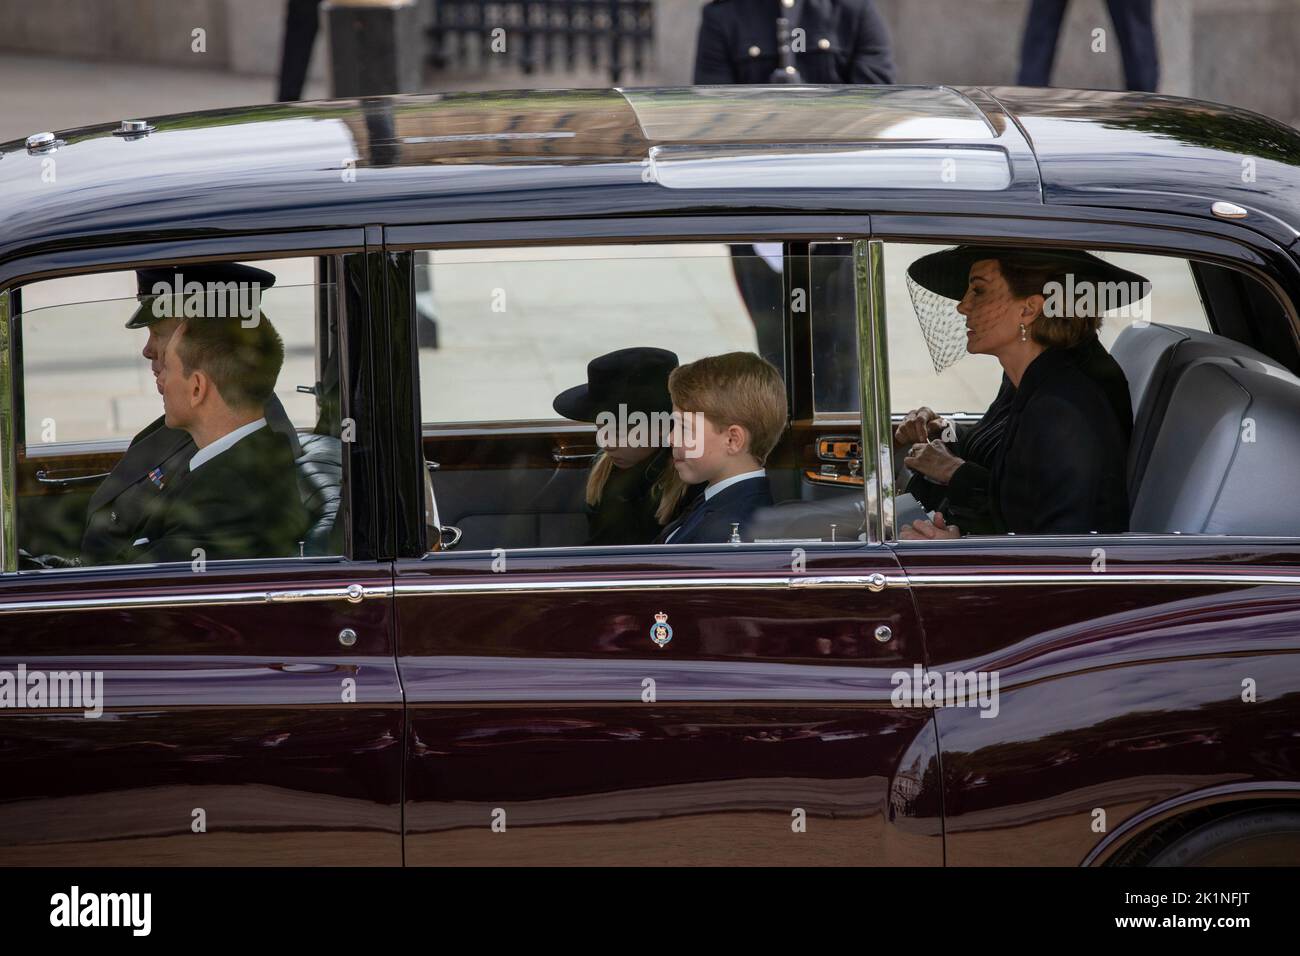 London, England. 19th September, 2022. The Princess of Wales, and her children Prince George and Princess Charlotte leave Westminster Abbey following the service for the State Funeral of her Majesty Queen Elizabeth II. The funeral was one of the biggest events the country has ever seen. Credit: Kiki Streitberger / Alamy Live News Stock Photo